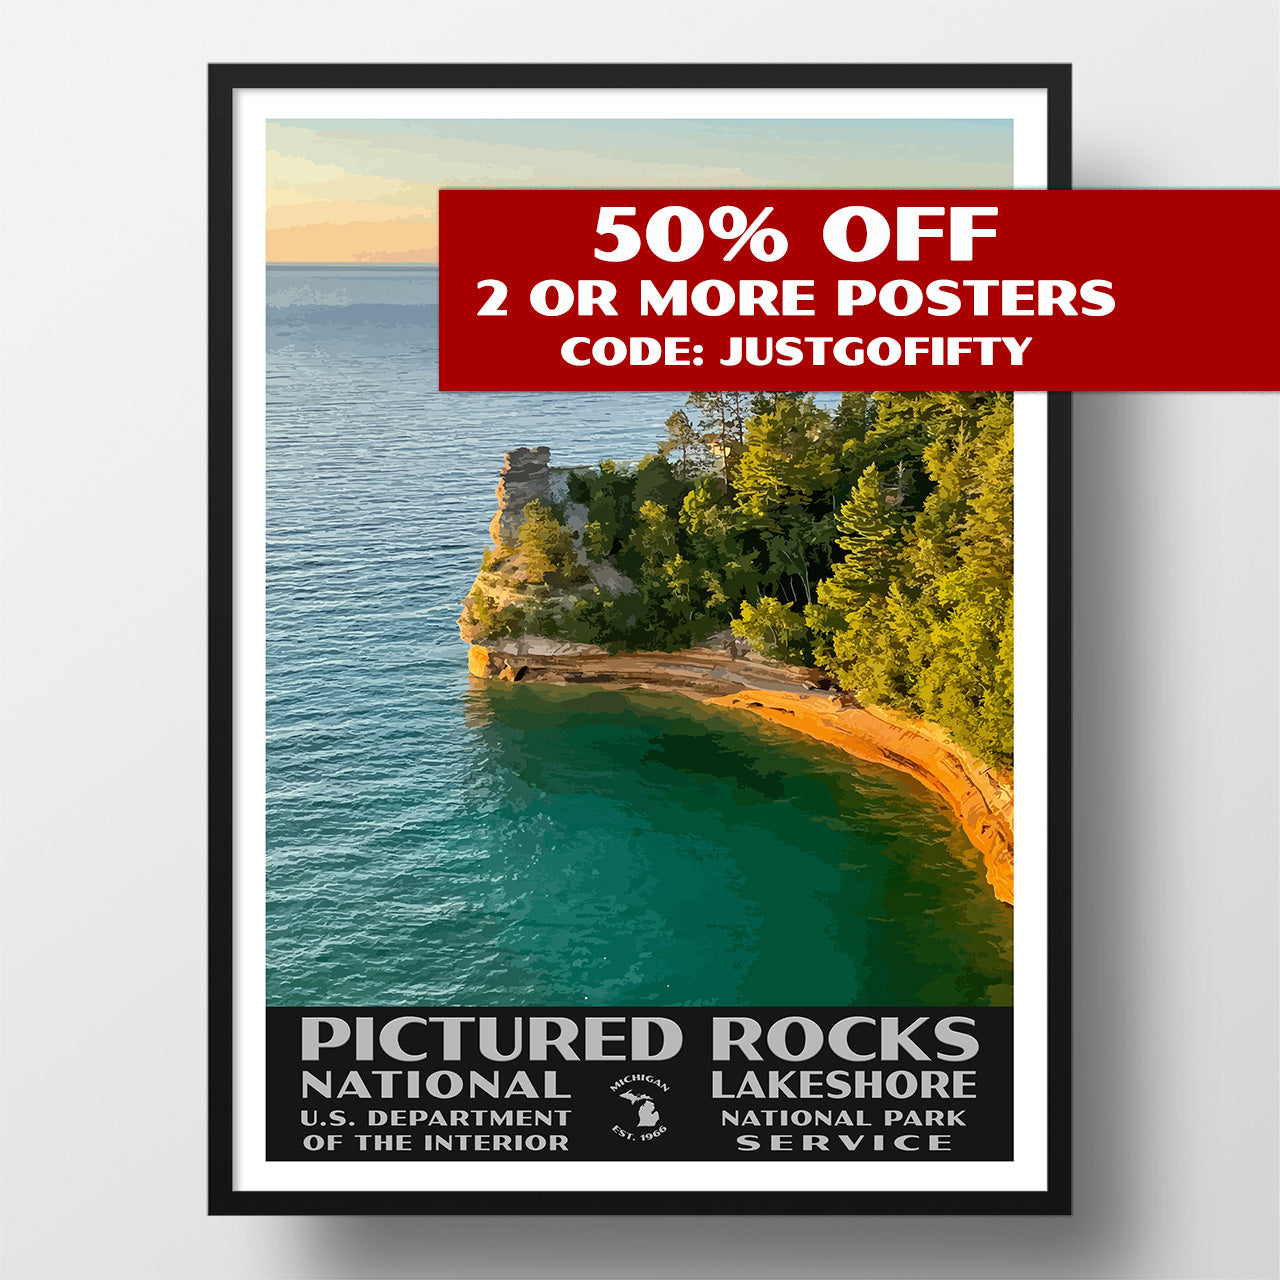 Pictured Rocks National Lakeshore poster